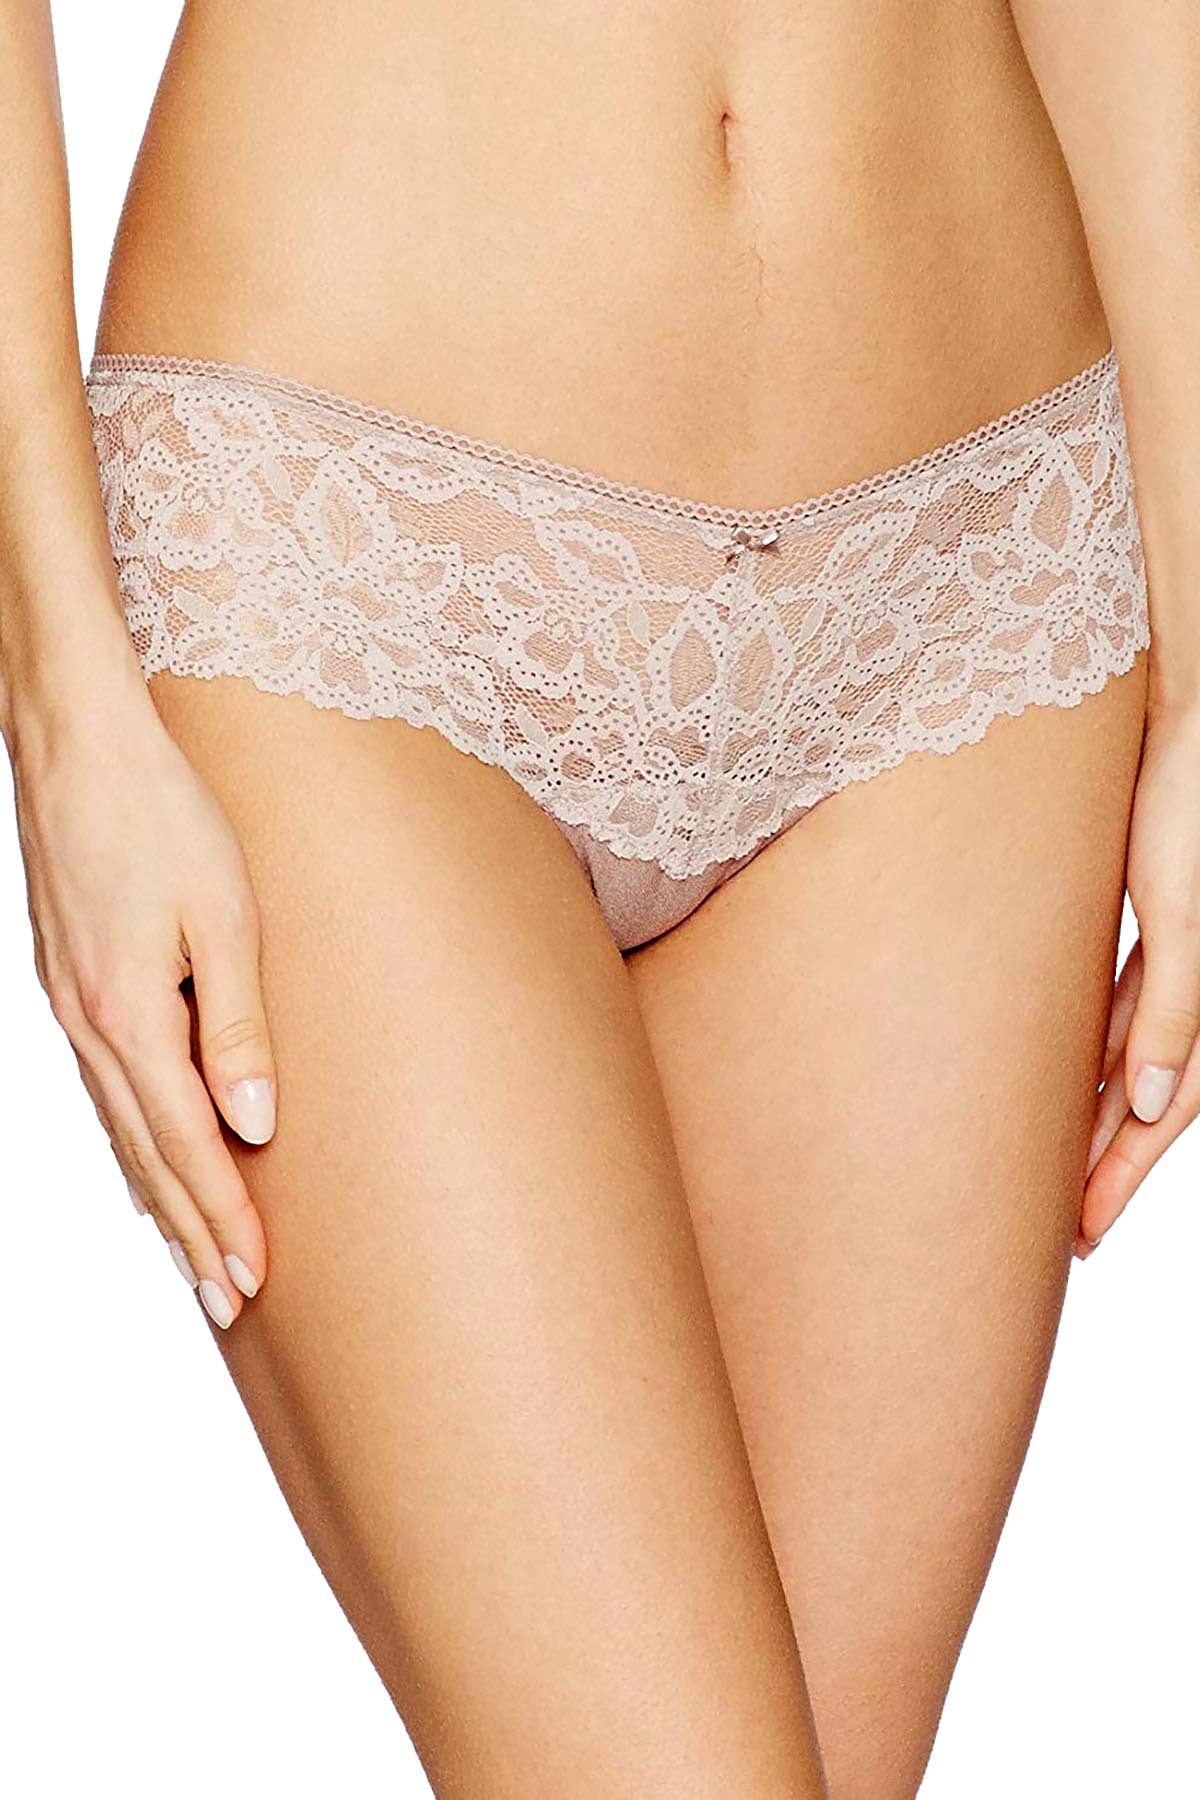 b.tempt'd Anter-Nude b.Charming Floral-Lace Tanga